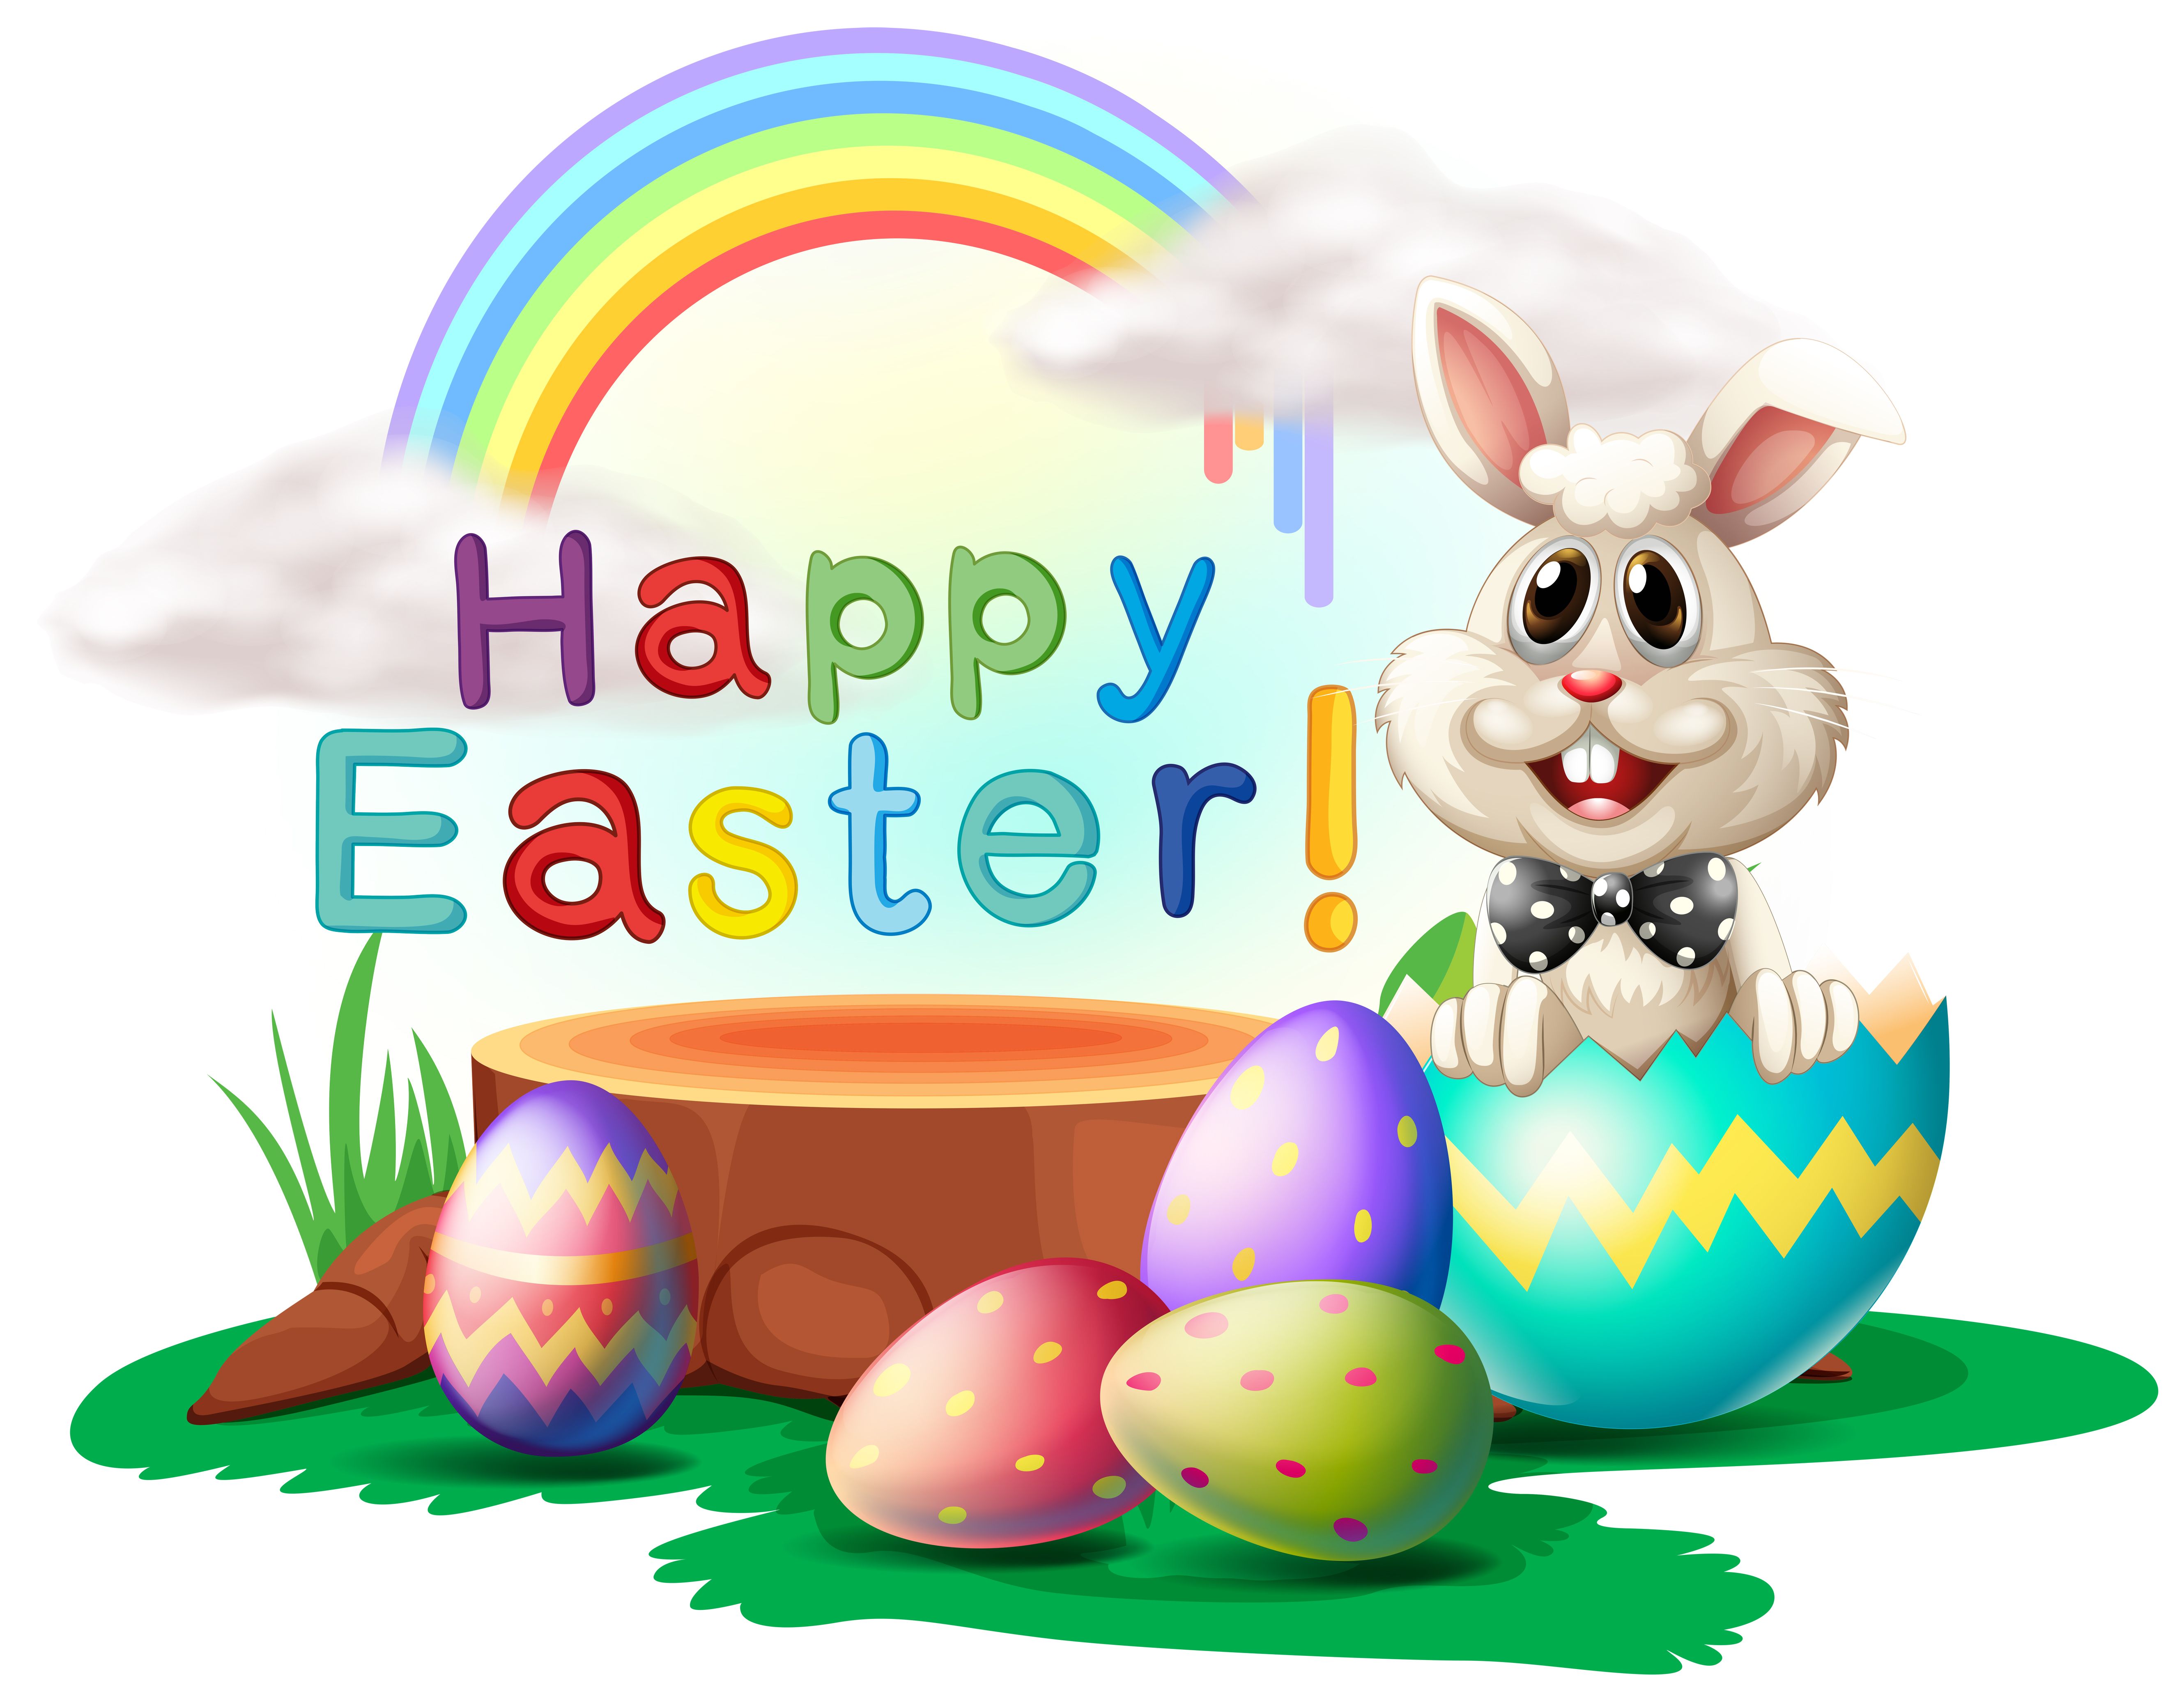 A Happy Easter greeting 520524 Download Free Vectors, Clipart